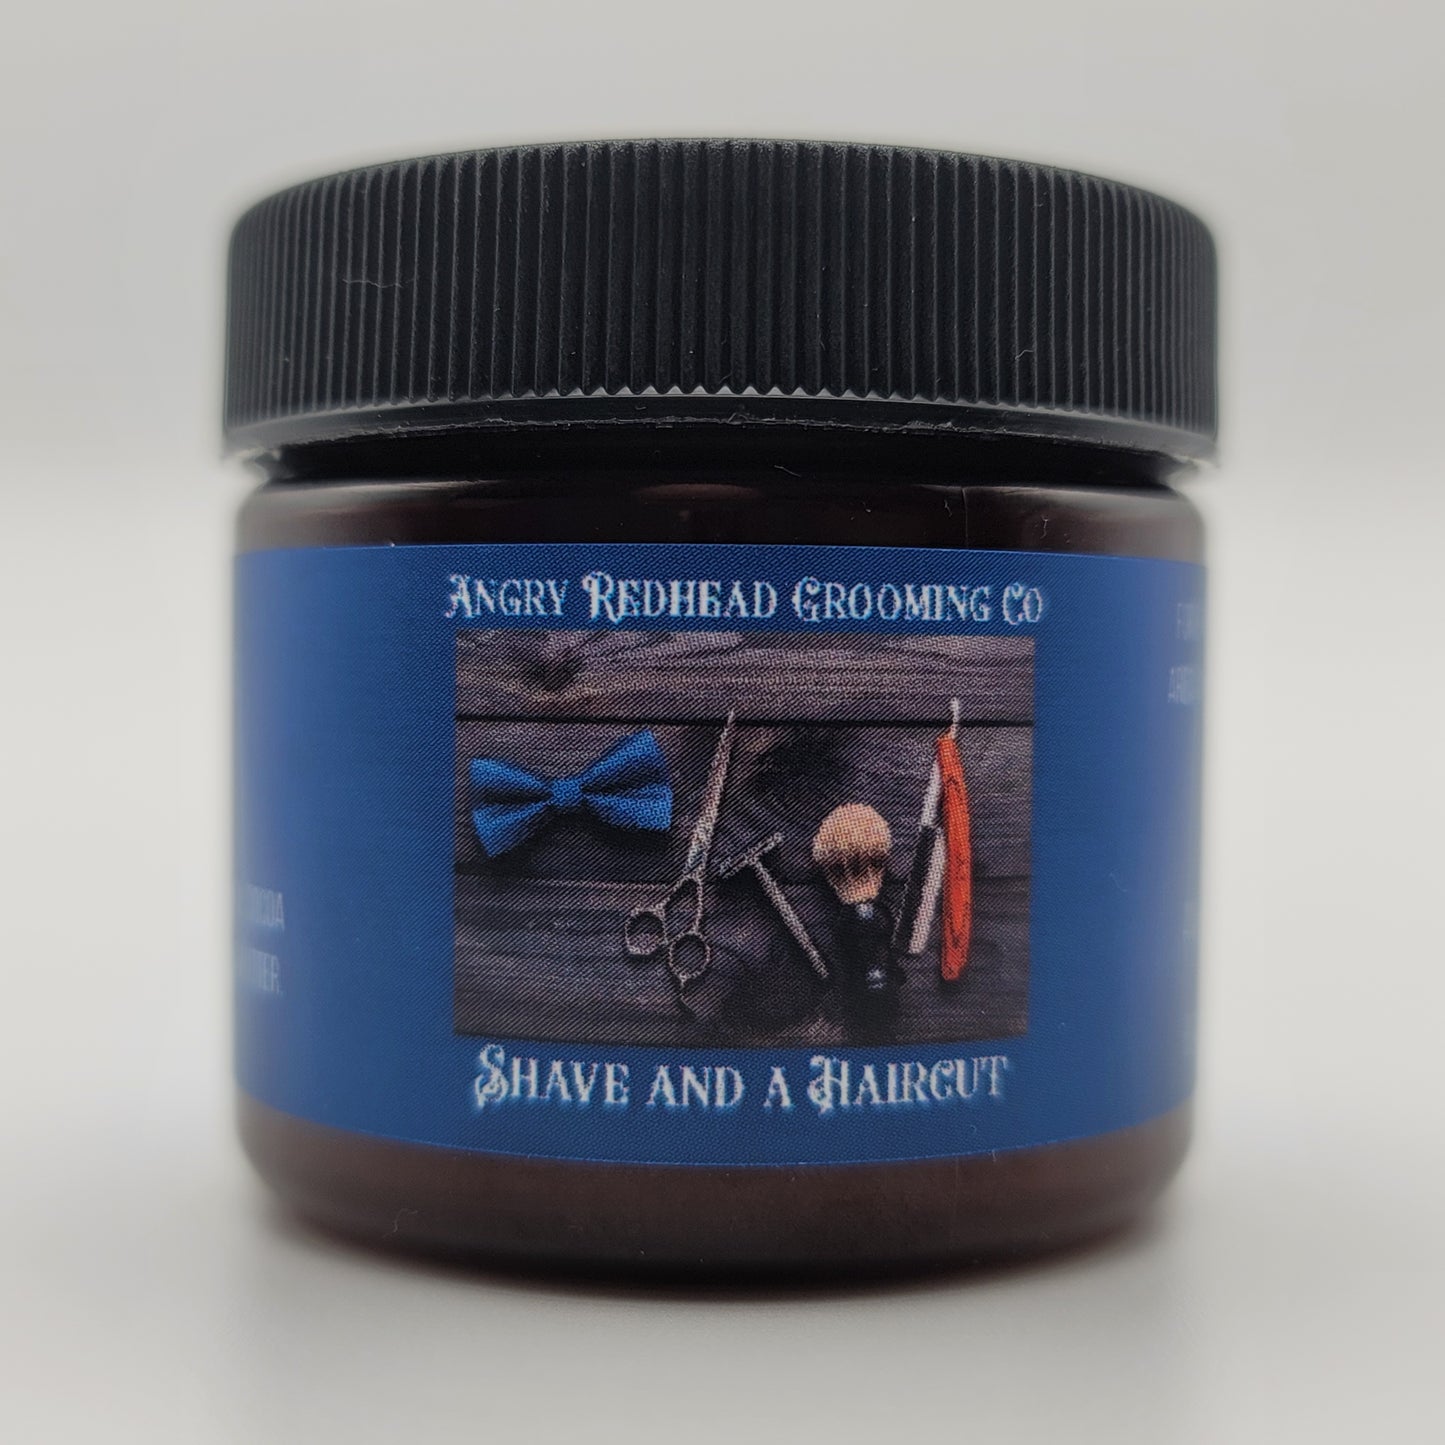 Shave and a Haircut Beard Butter by Angry Redhead Grooming Co - angryredheadgrooming.com